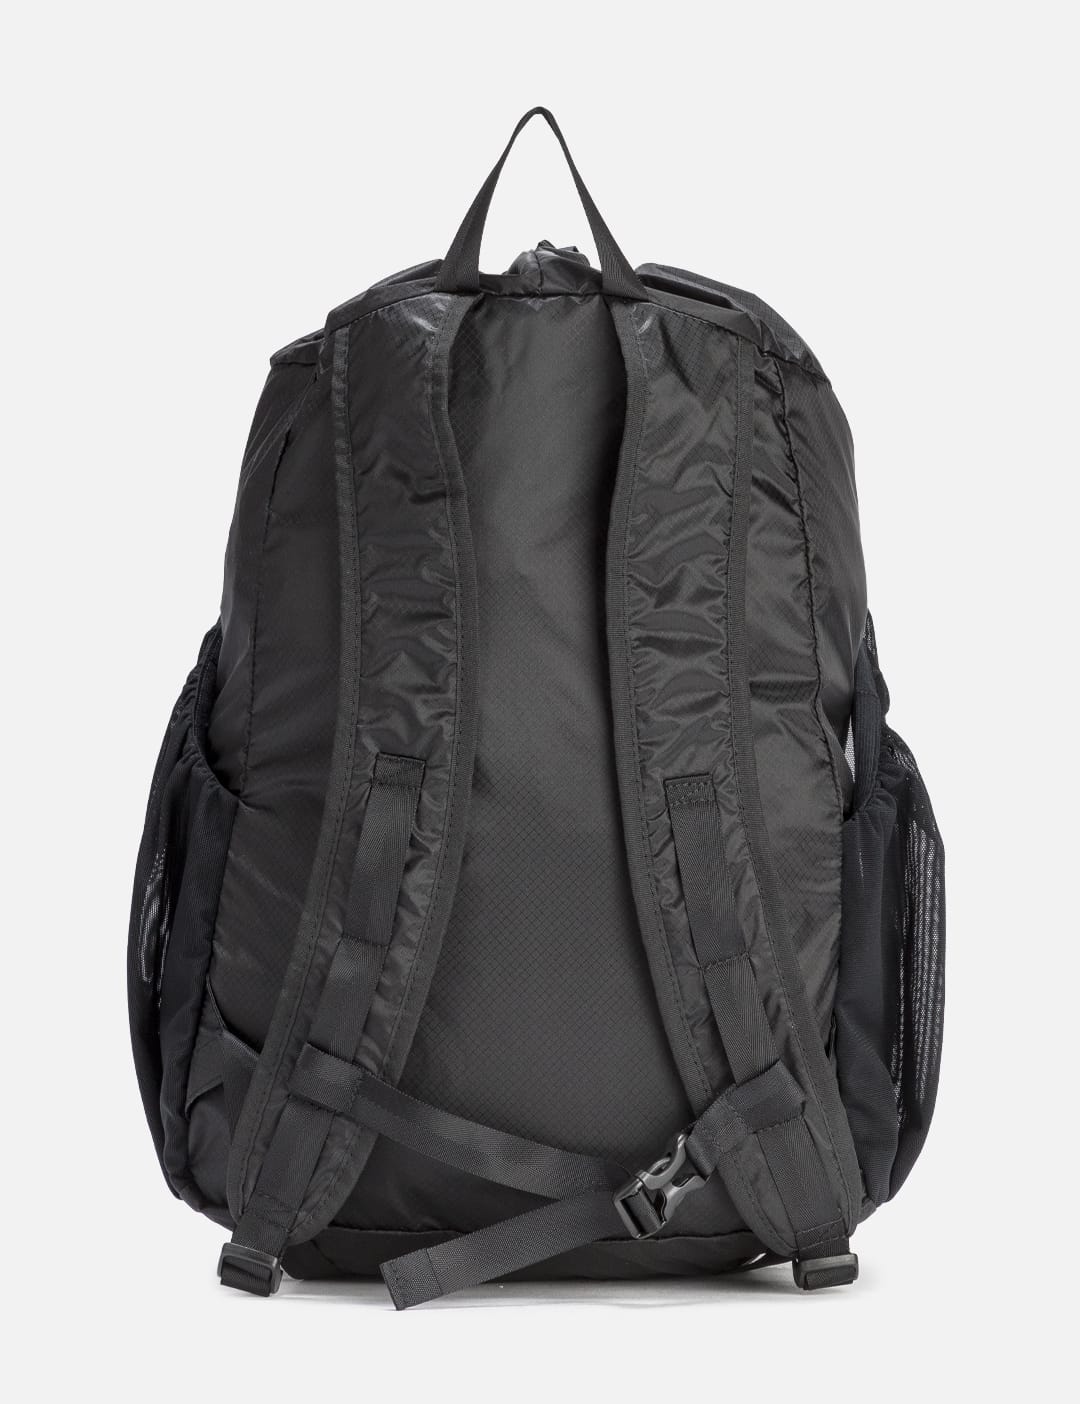 Meanswhile - CORDURA RIPSTOP Knapsack | HBX - Globally Curated